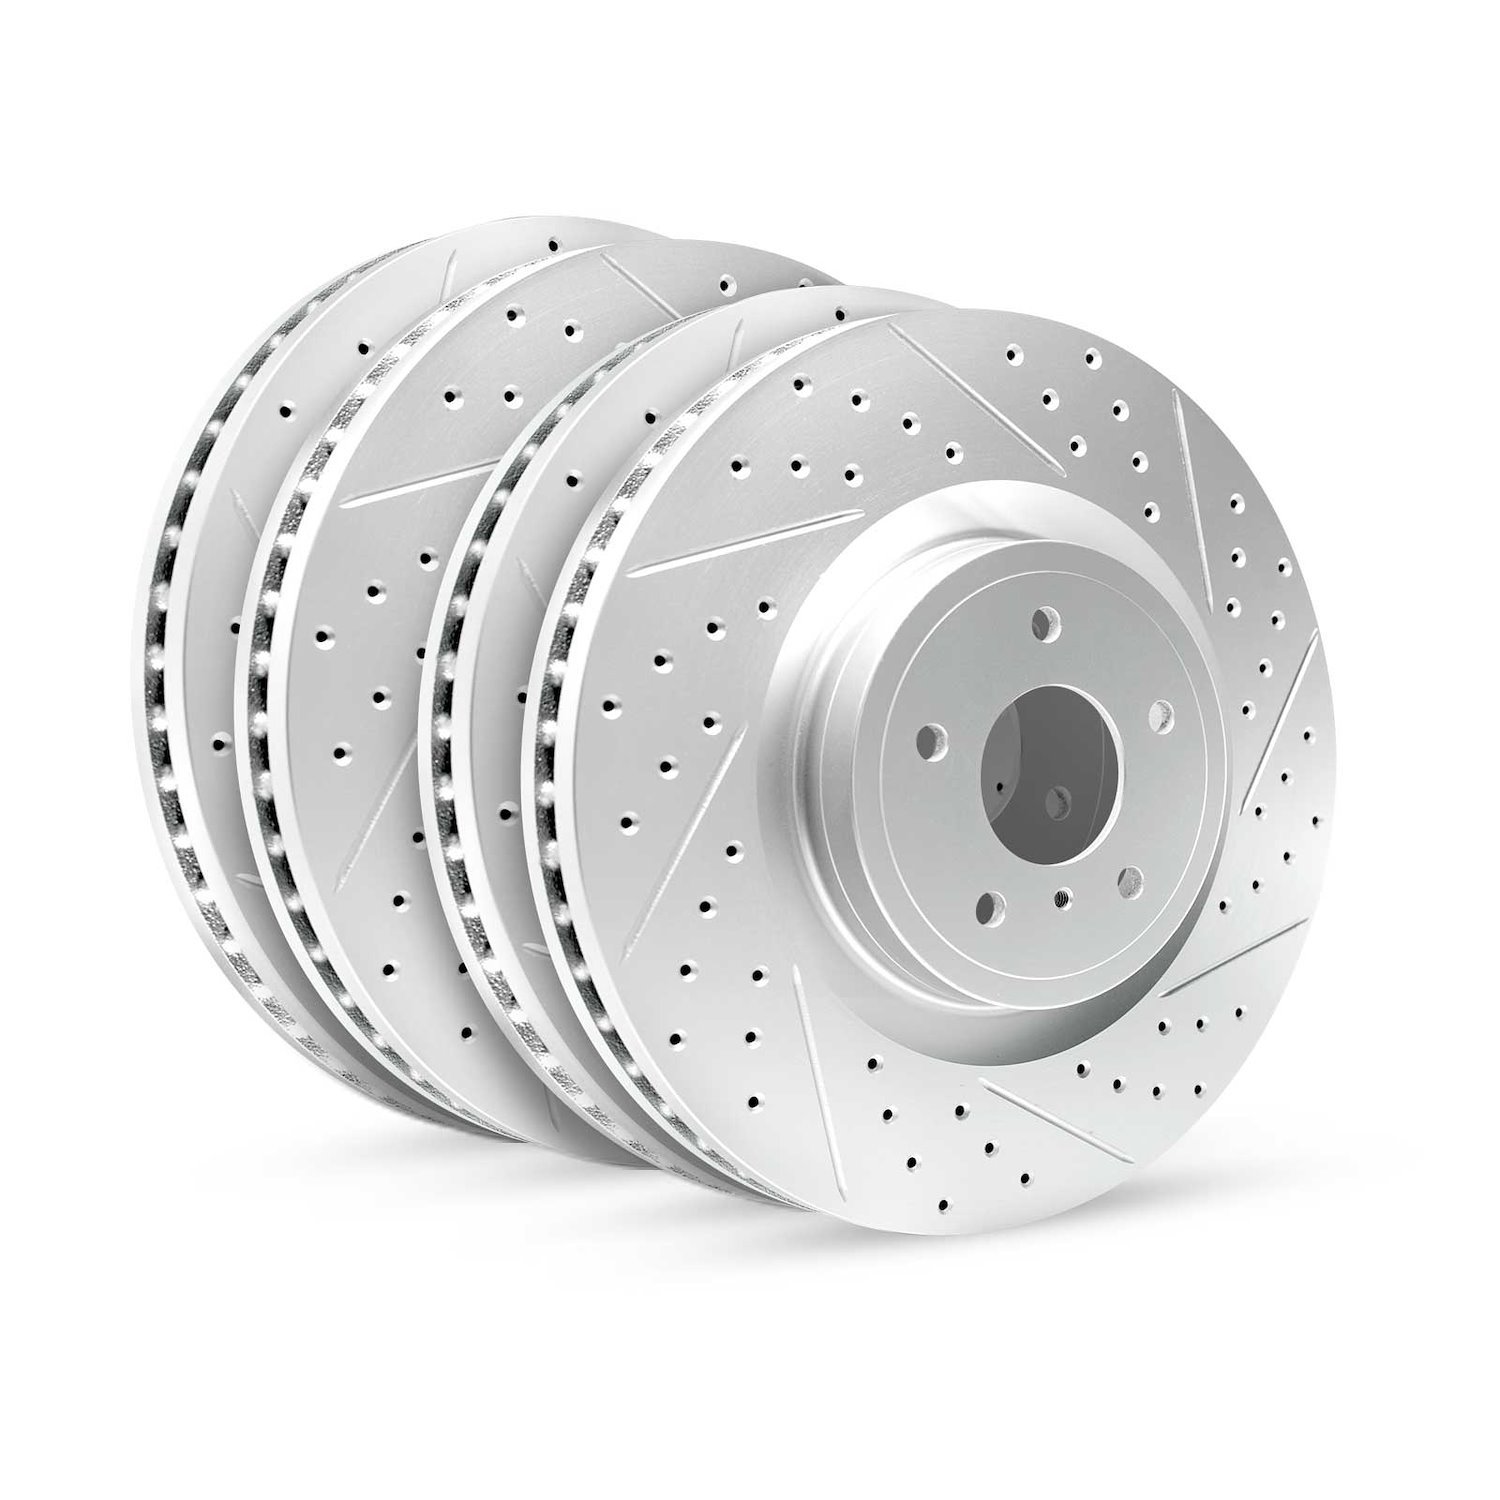 GEO-Carbon Drilled/Slotted Rotors, 2006-2009 Land Rover, Position: Front/Rear